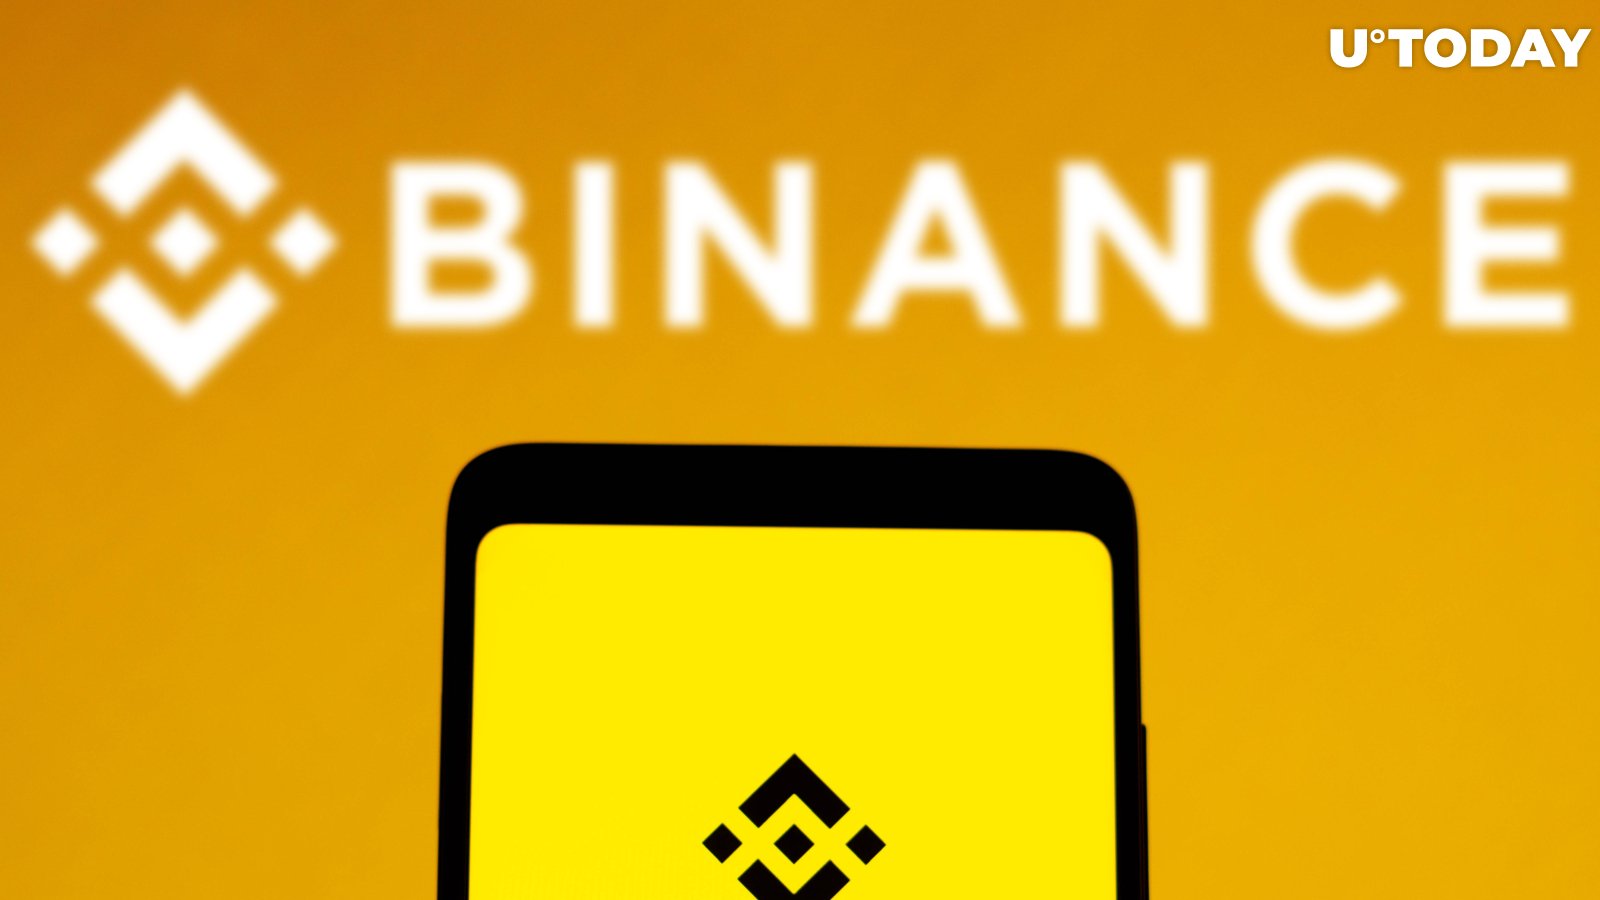 Binance to Invest Millions Into Elon Musk's Twitter Deal